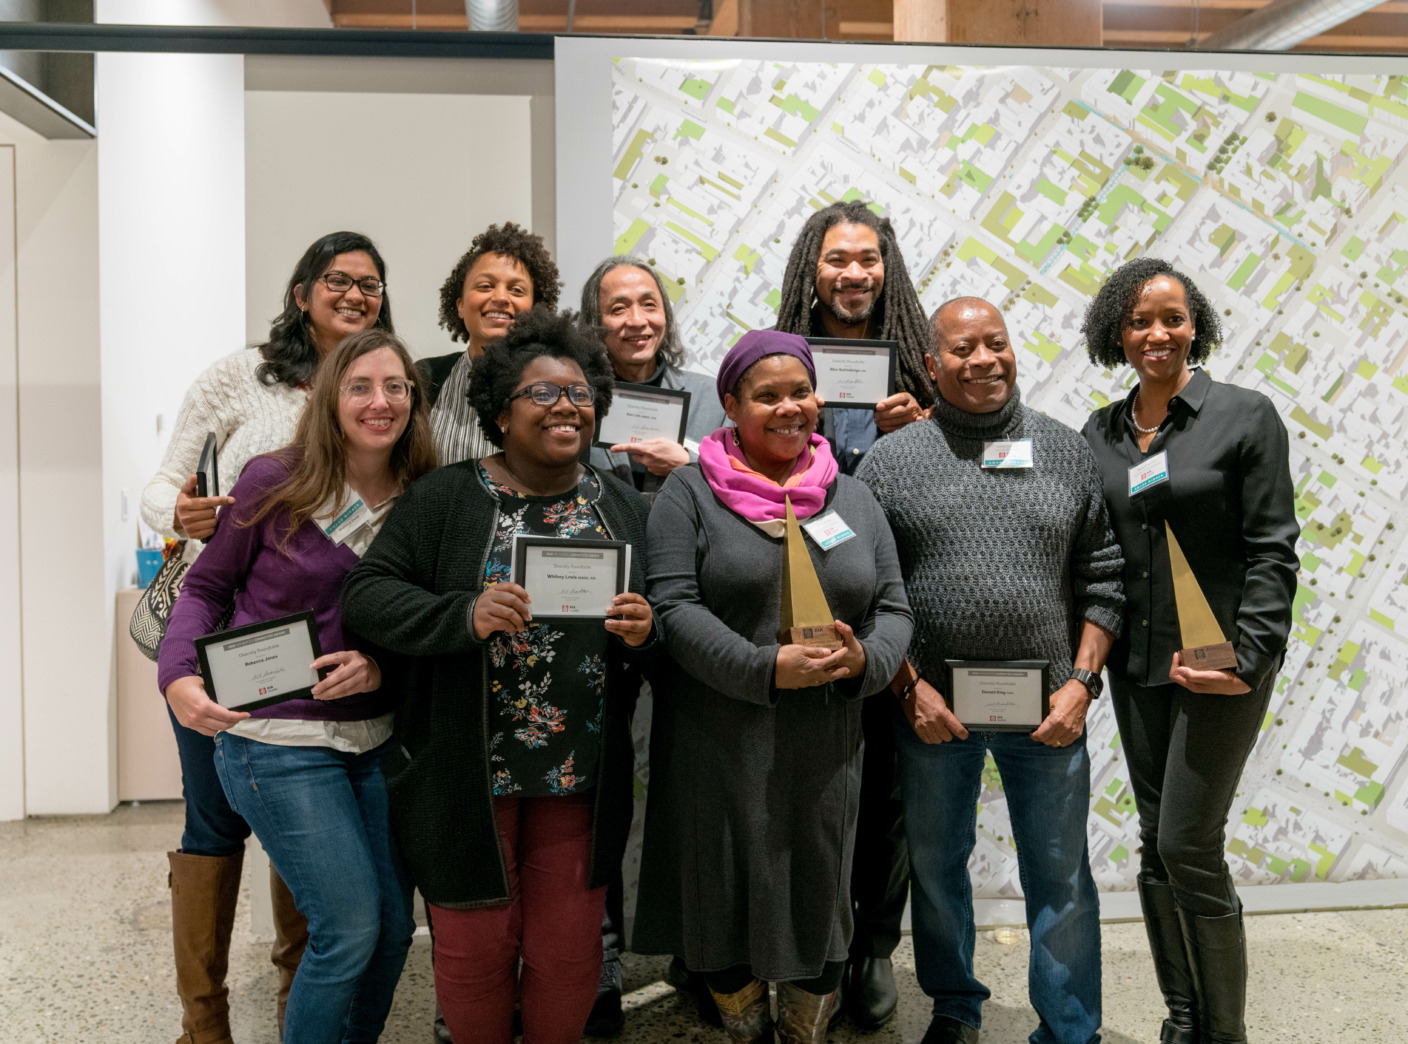 Diversity Roundtable receives the AIA Seattle Committee Award at the 2018 Parti